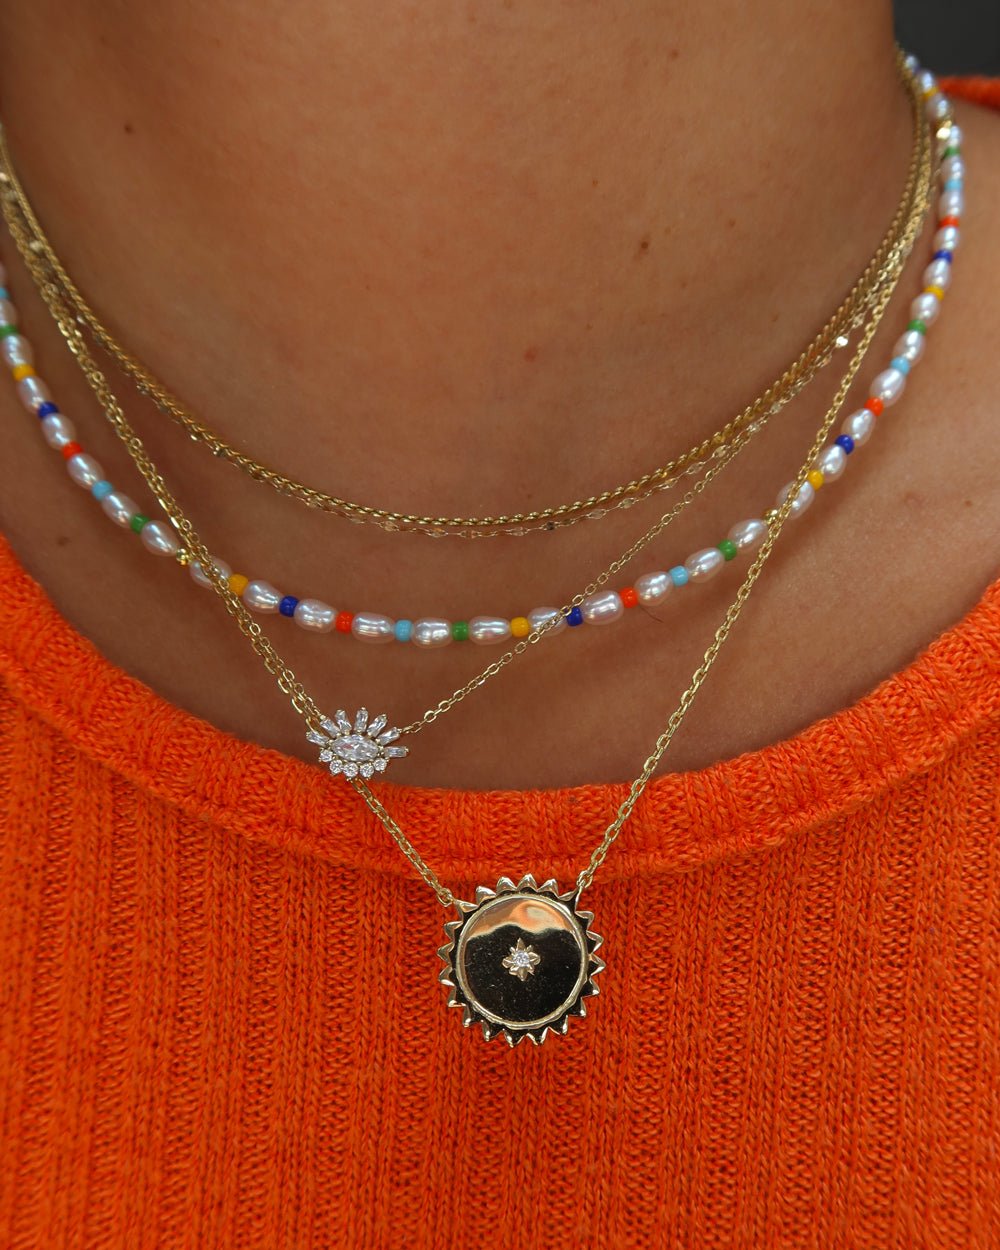 EVELYN RAINBOW BEAD AND PEARL NECKLACE - Shop Cupcakes and Cashmere